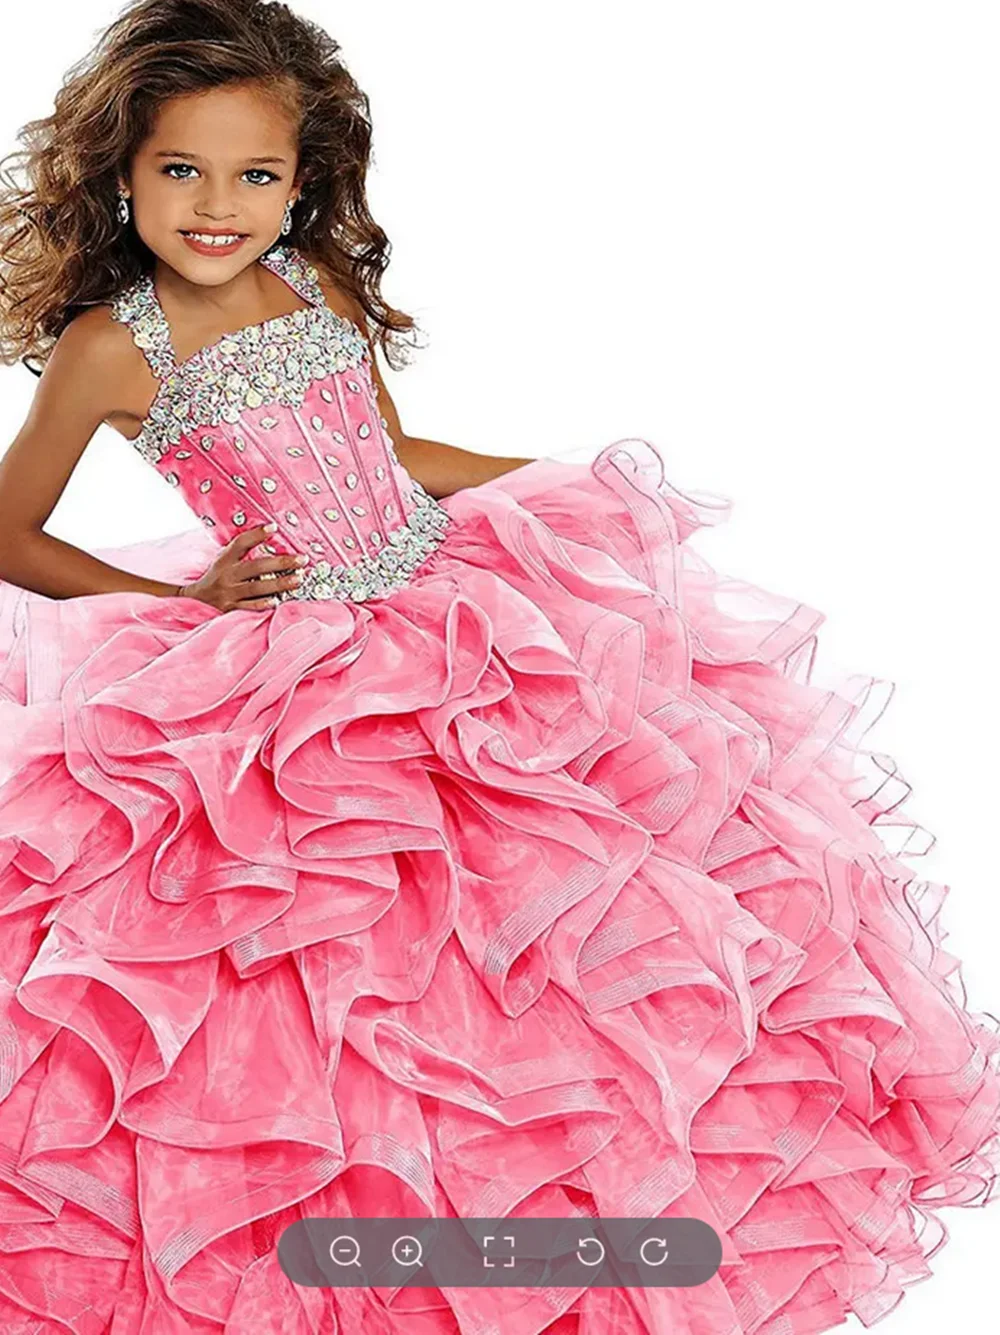 

Flower Girl Dresses For Weddings Vestidos Daminha Kids Pageant Ball Gowns Feathers First Communion Dresses For Girls